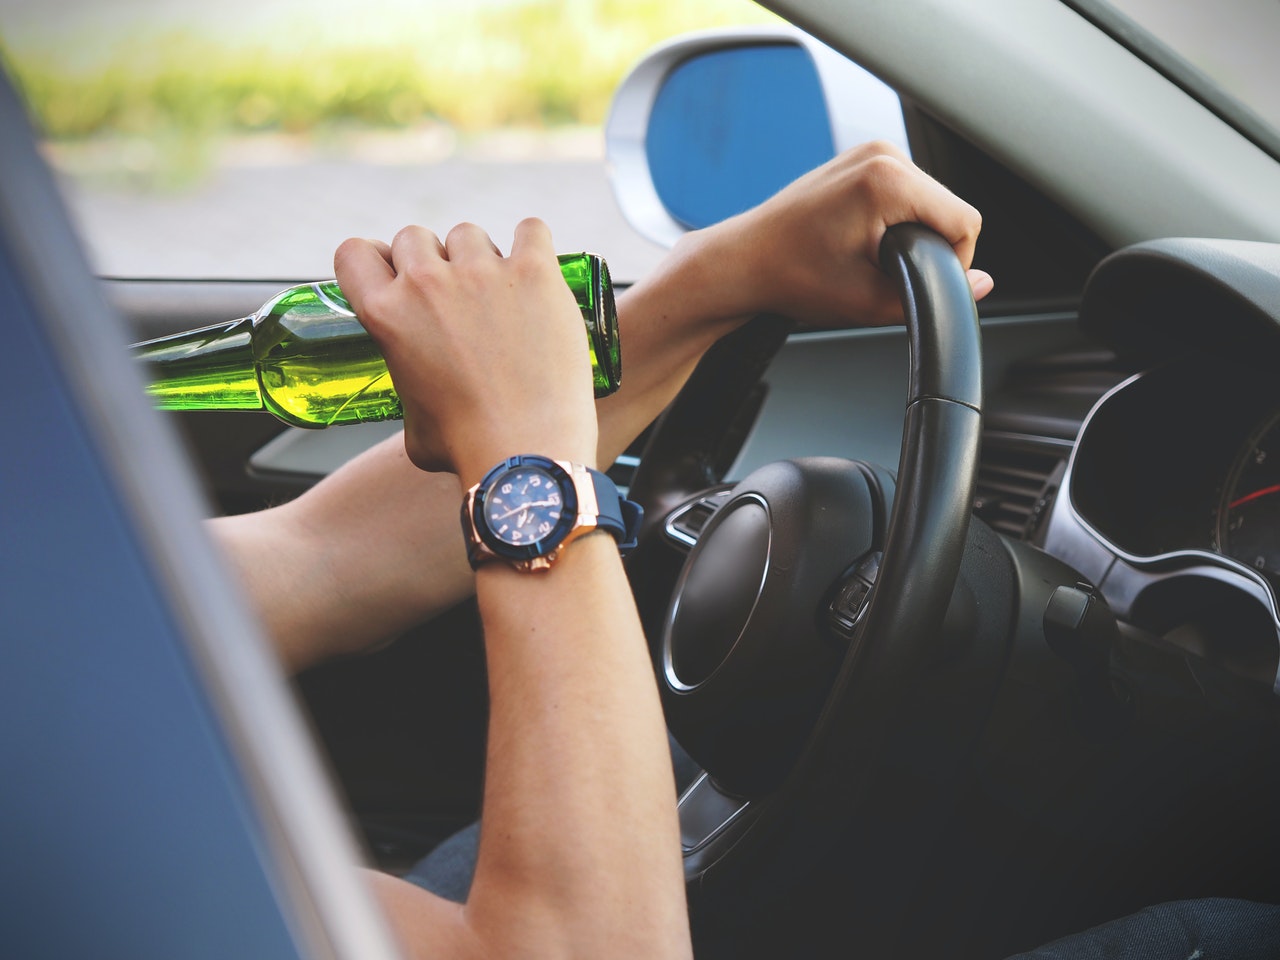 Why You Shouldn’t Drink and Drive | Greenslips 4 Earth